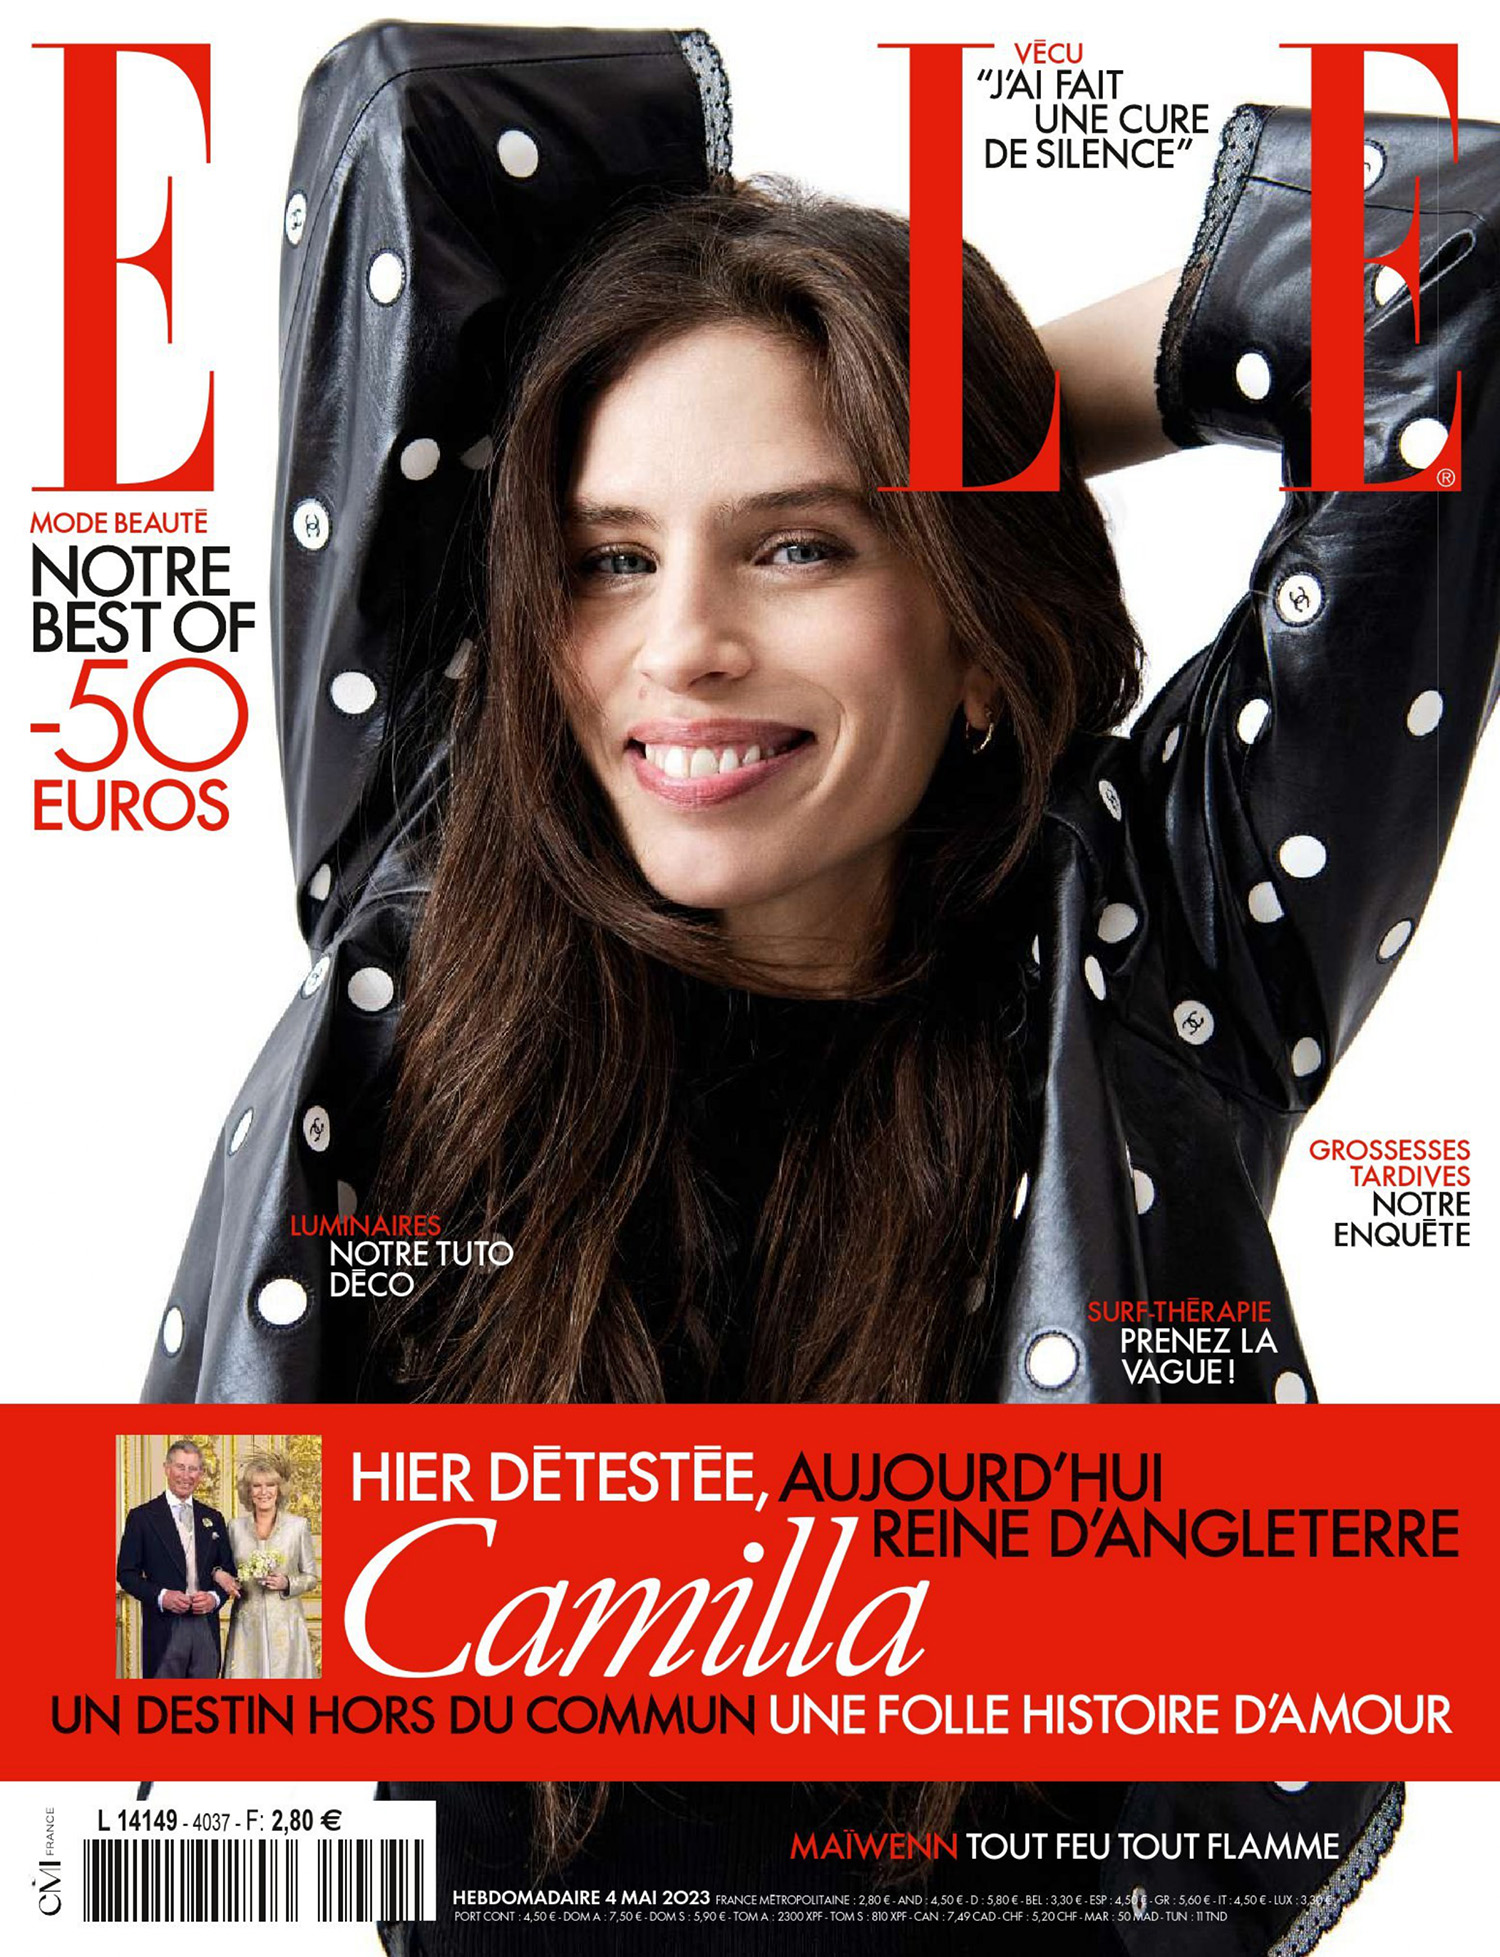 Maïwenn in Chanel on Elle France May 4th, 2023 by Claudia Knoepfel